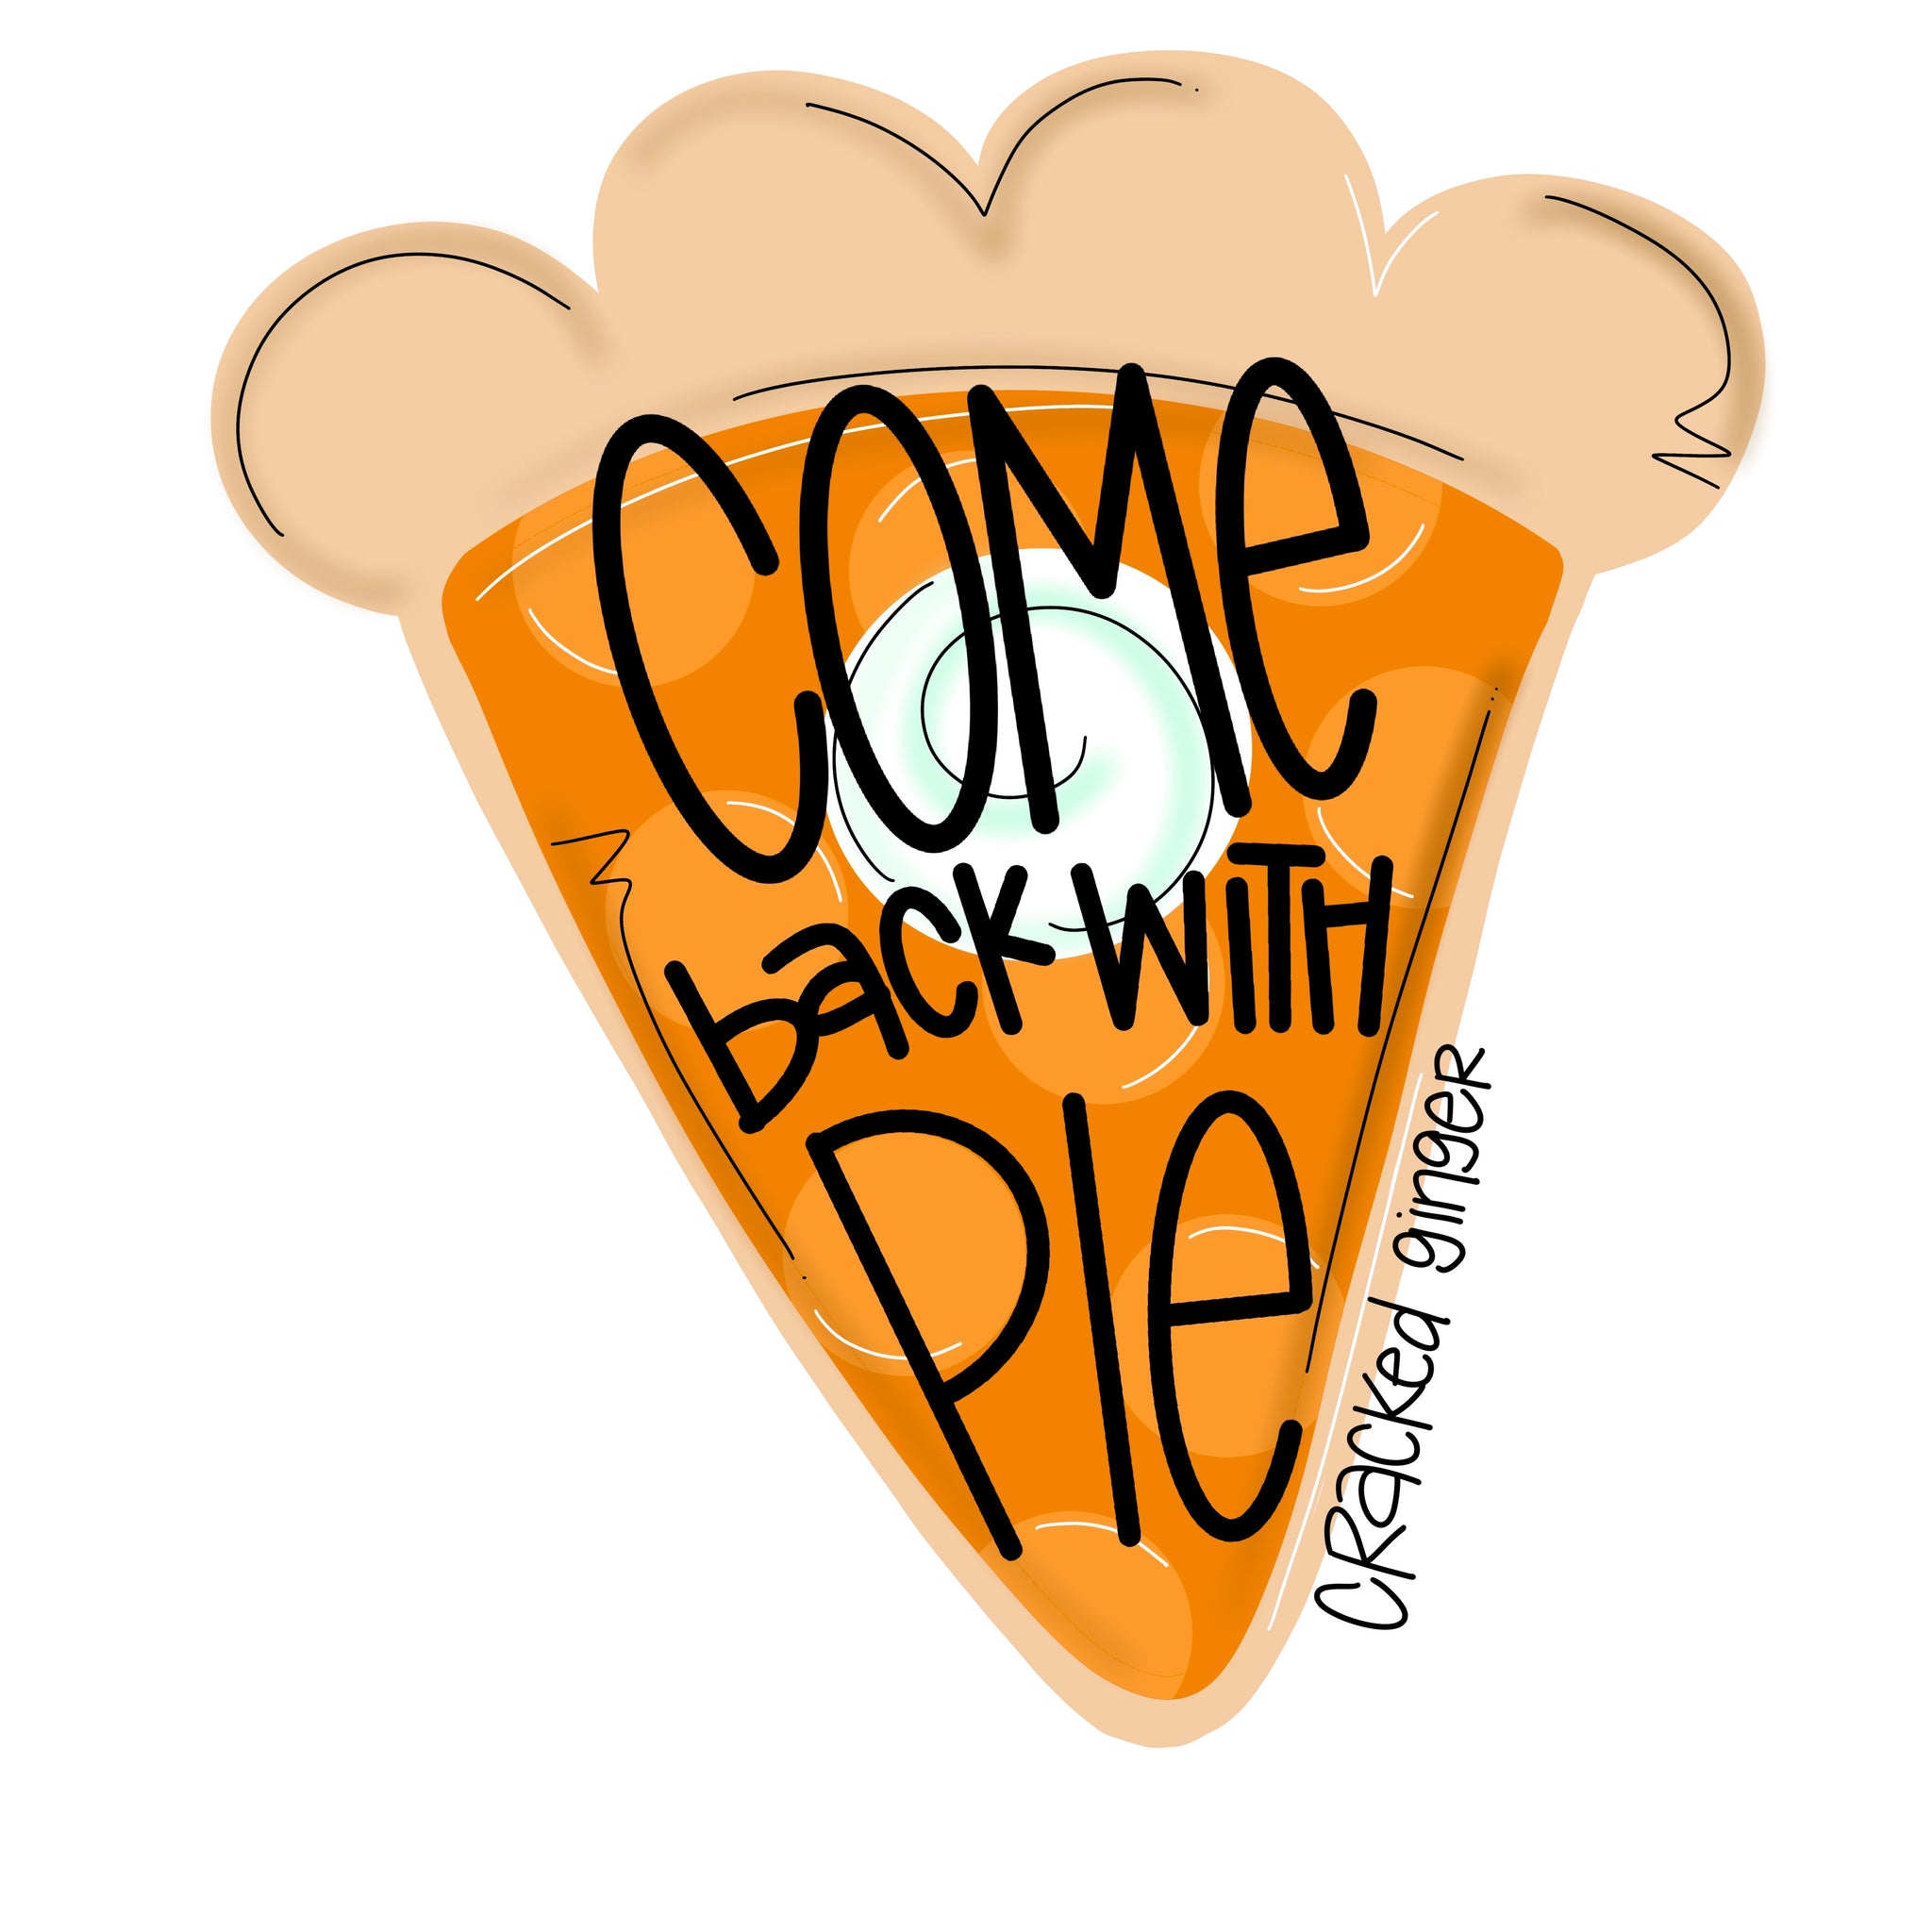 Come back with Pie Cutouts and Kits